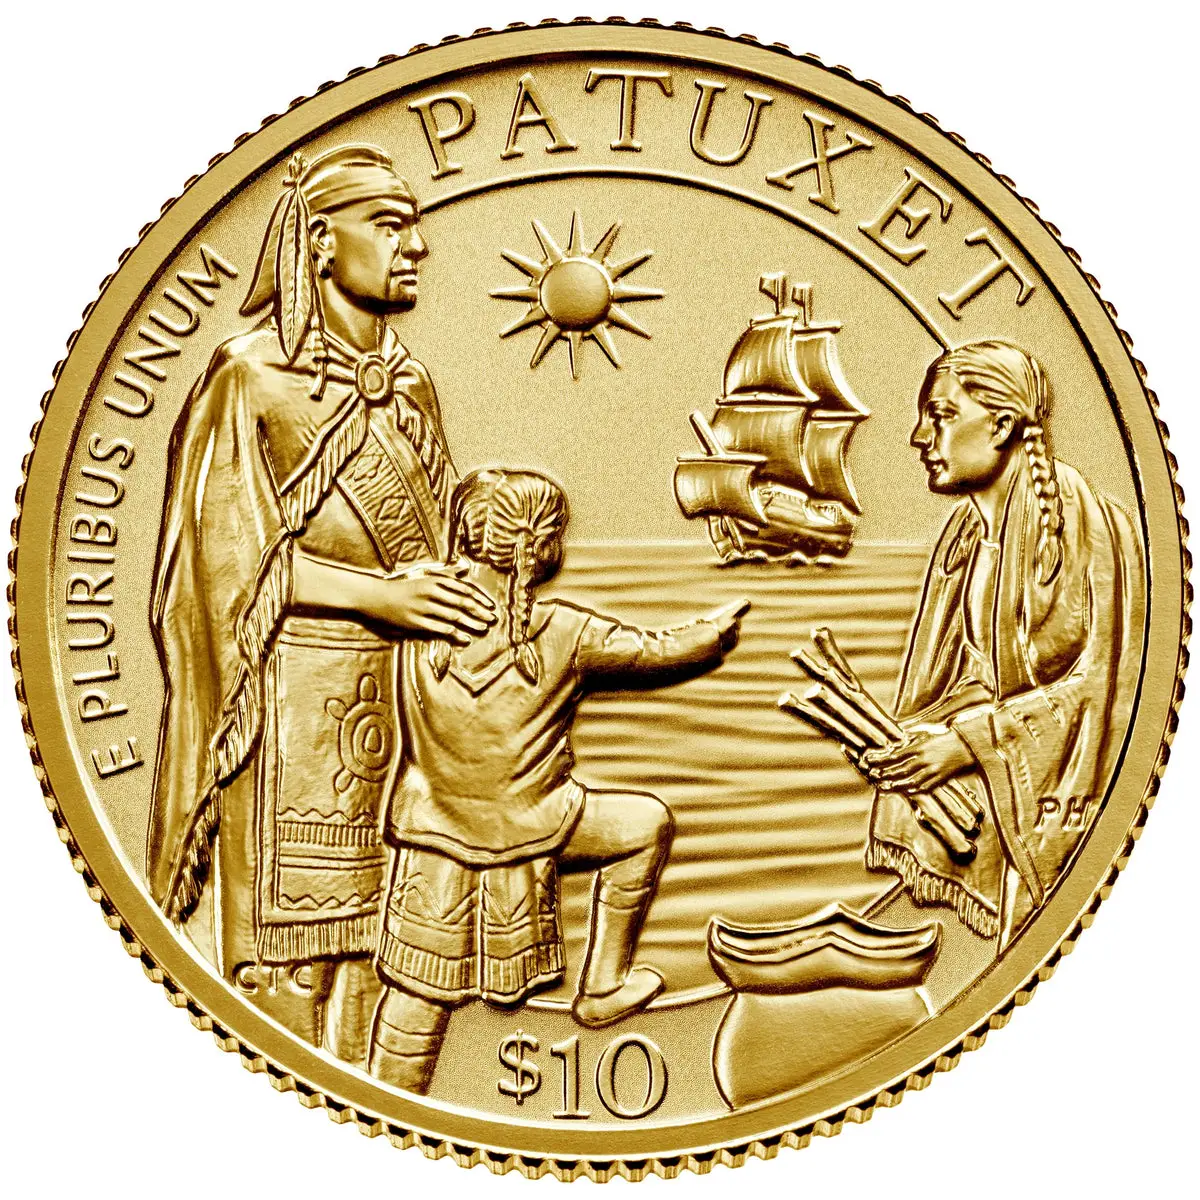 2020 Mayflower 400th Anniversary Gold Reverse Proof Coin